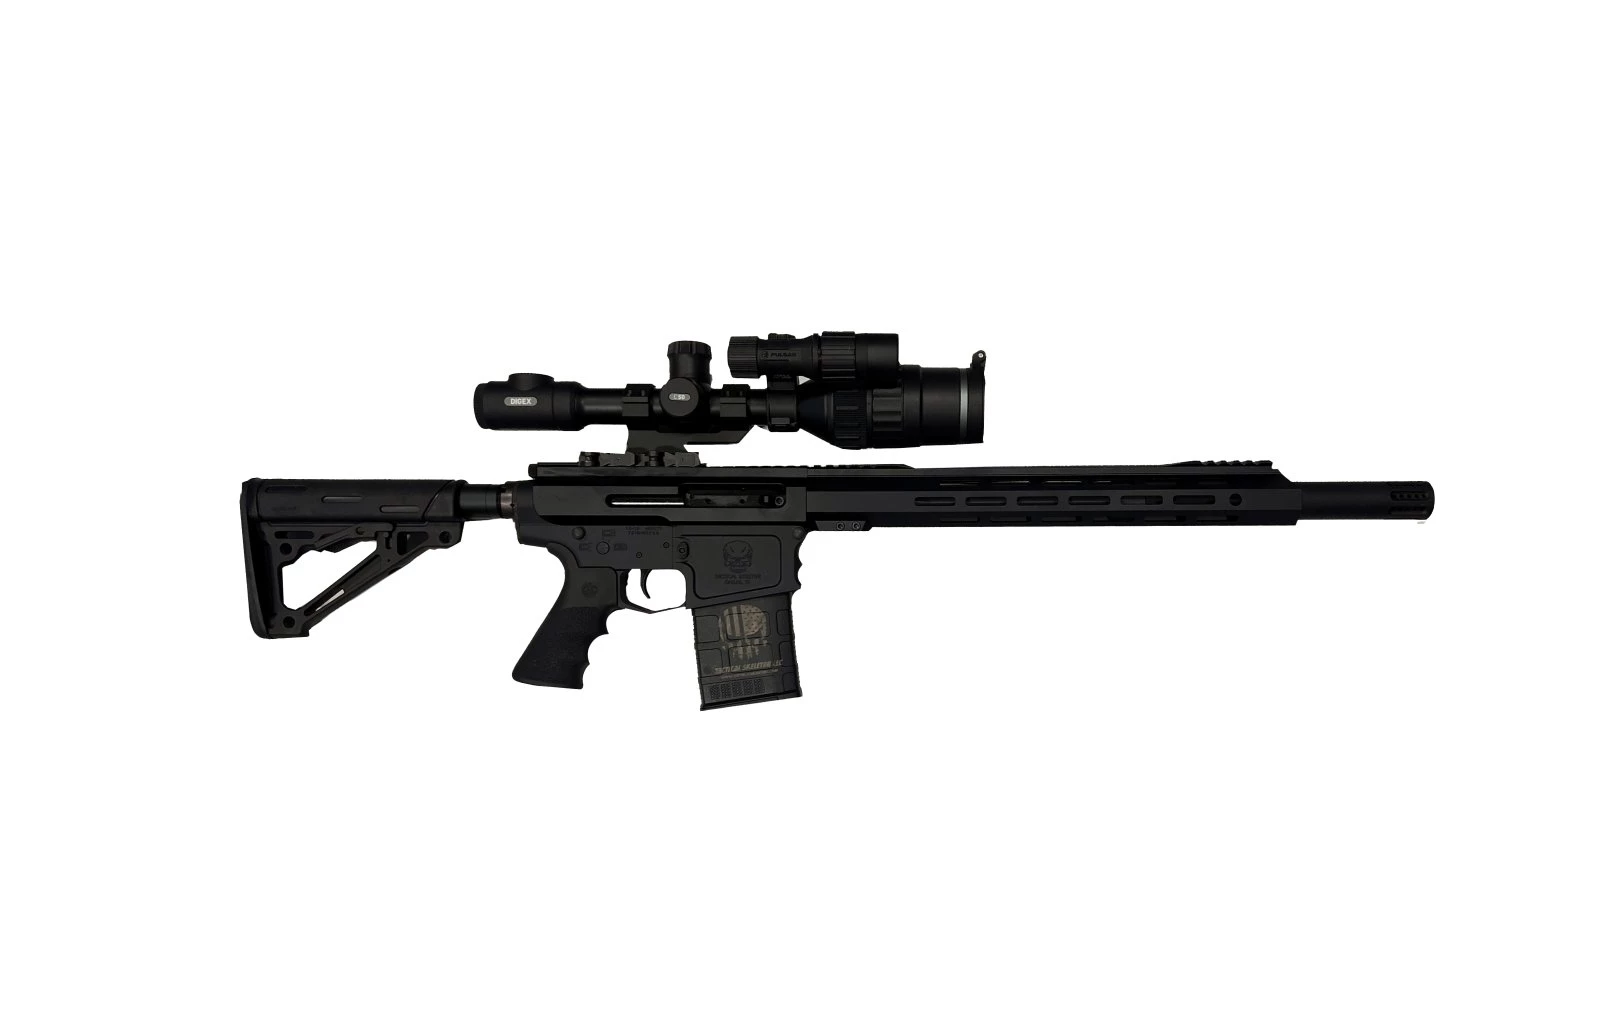 AR10 18" SIDE CHARGER 308 WIN BILLET RIFLE + PULSAR DIGEX C50 NIGHT VISION SCOPE COMBO PACKAGE